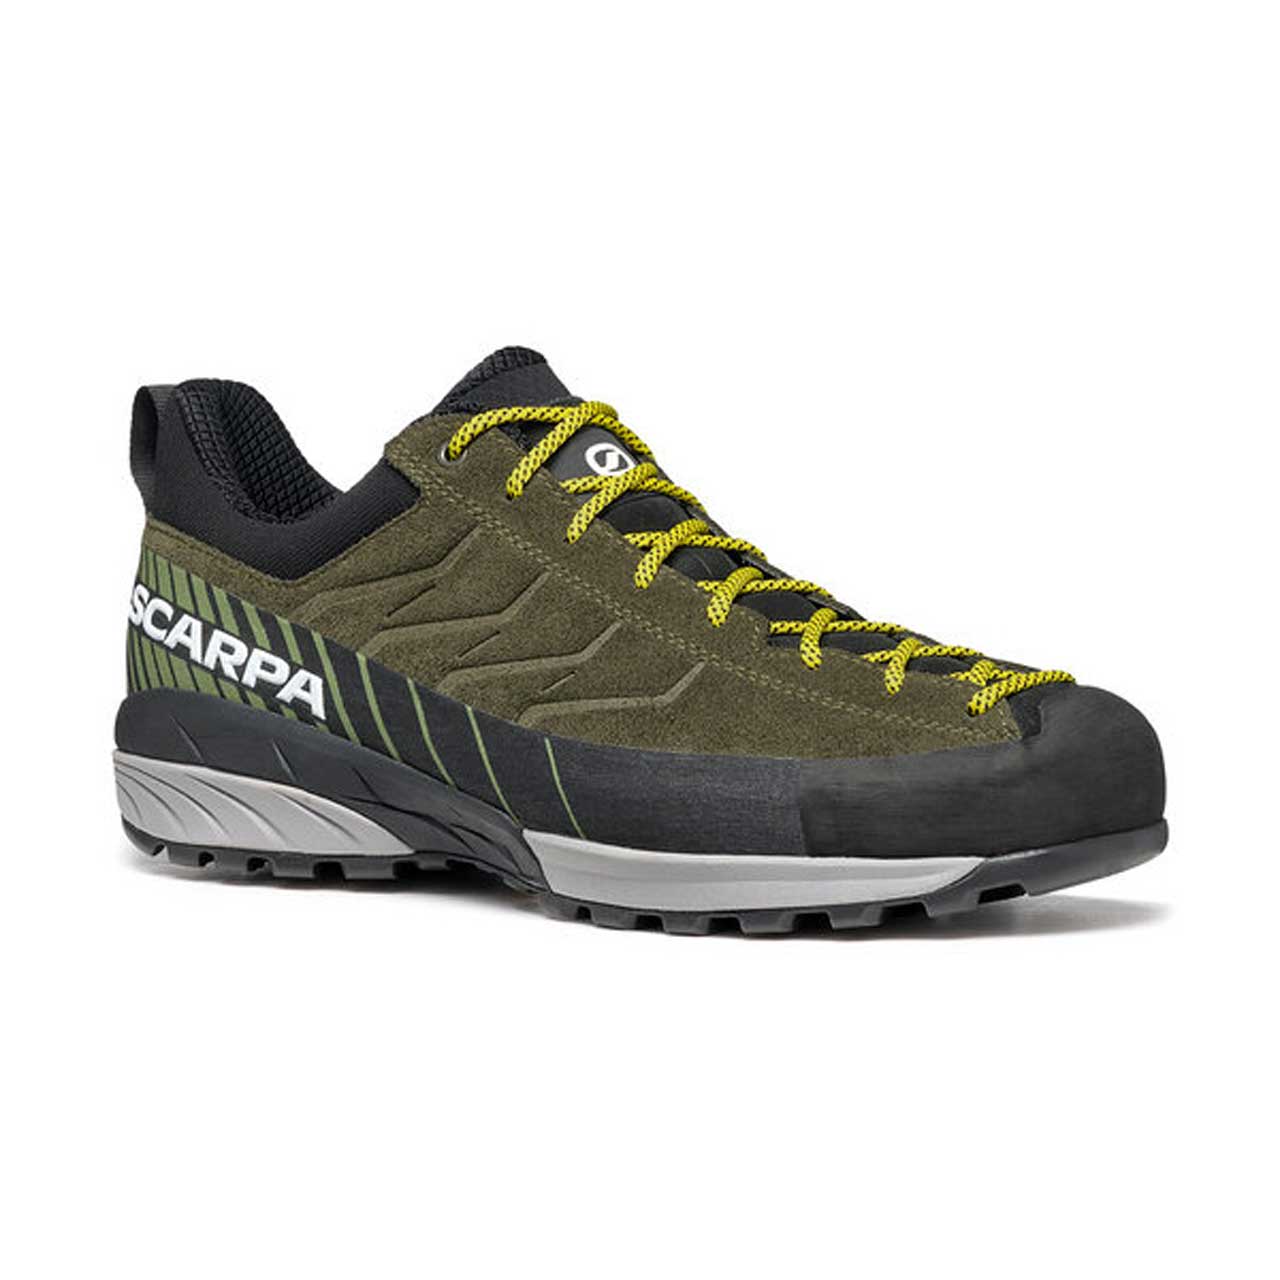 Scarpa Mescalito - Thyme Green/Forest, 42